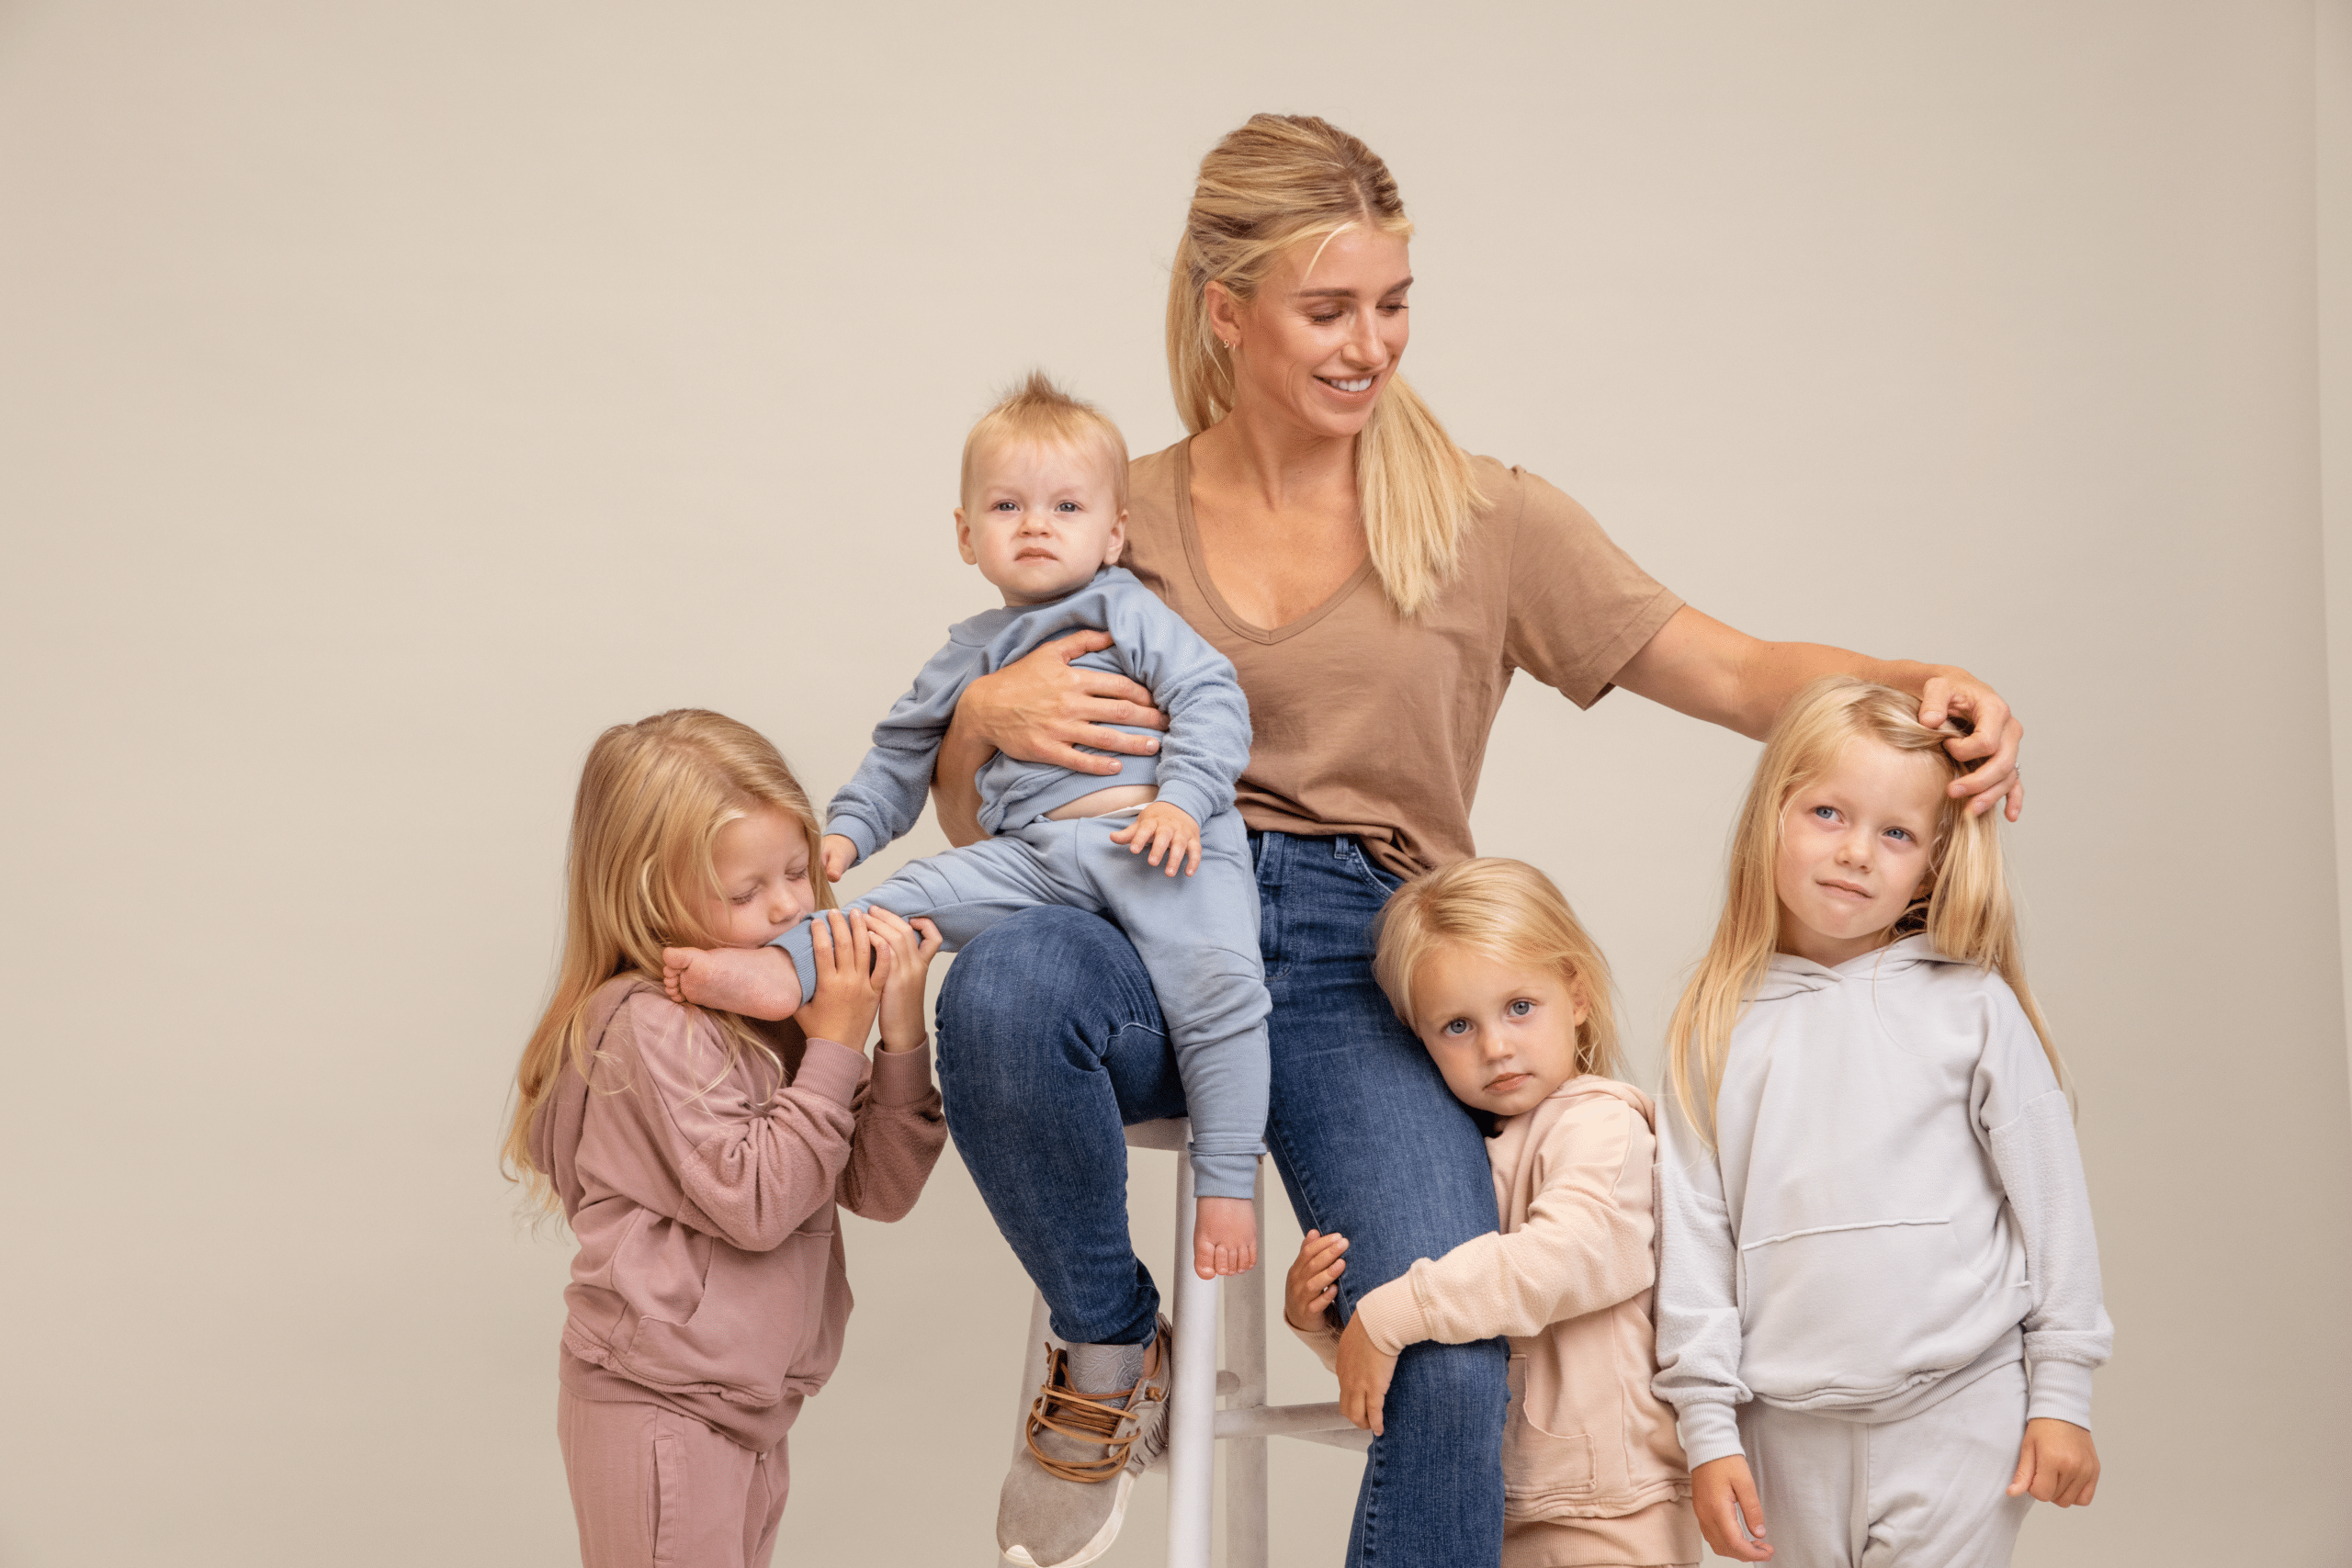 Kelly Stafford's 'Family First' Meant Turning to Formula Feeding